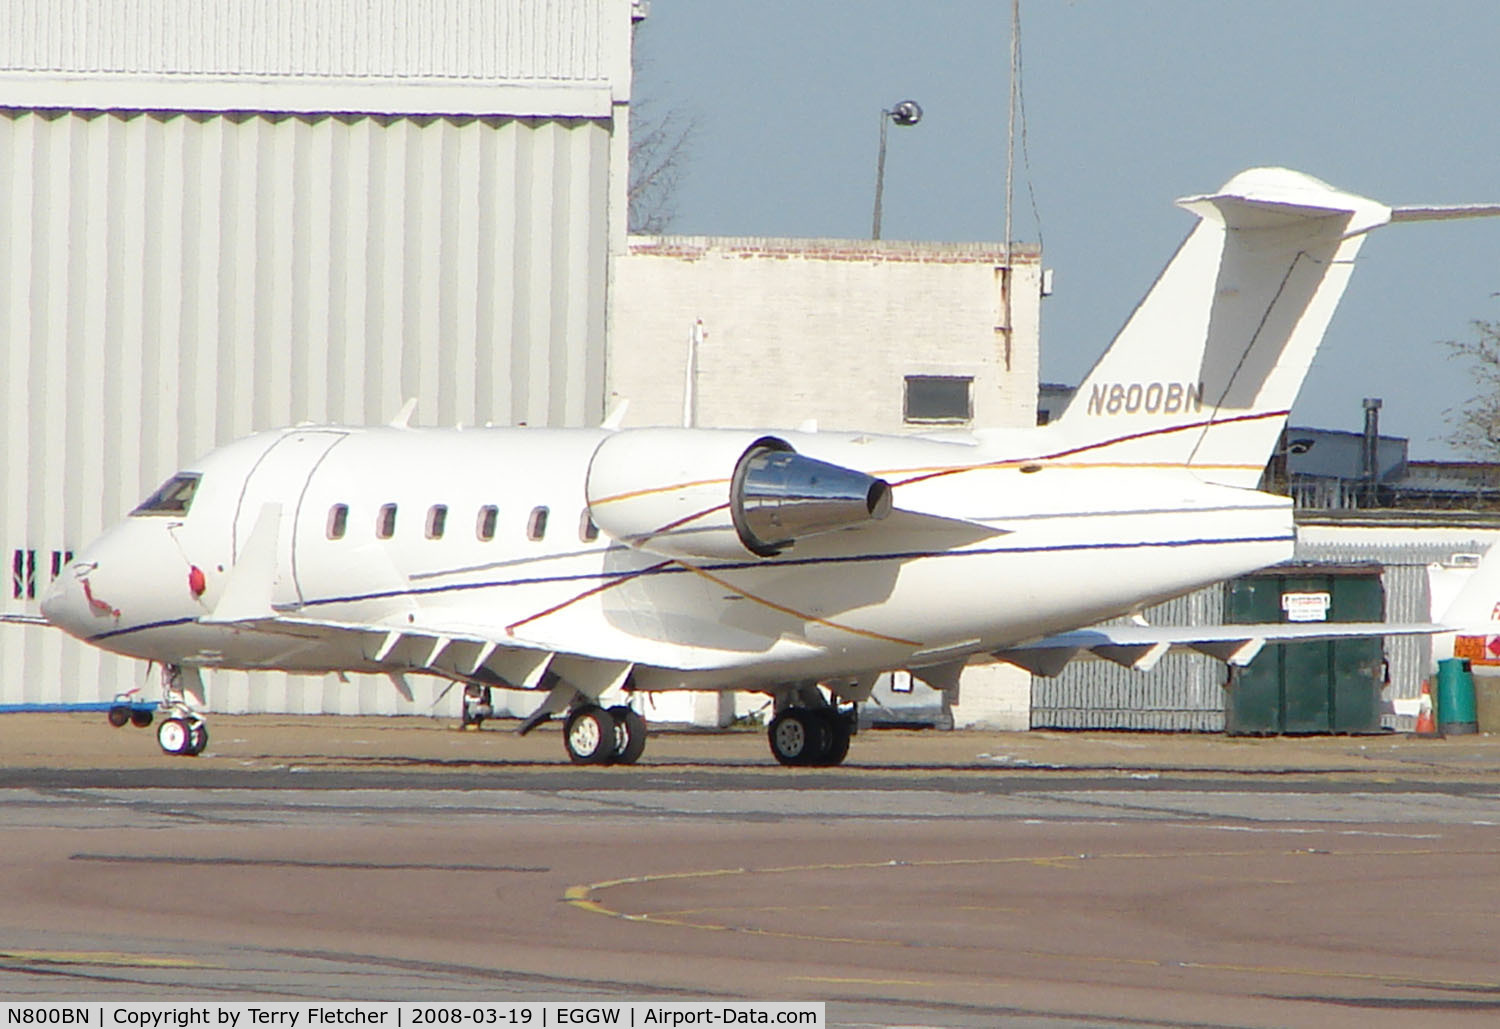 N800BN, 2004 Bombardier Challenger 604 C/N 5600, This American registered Challenger appears to be based at Luton